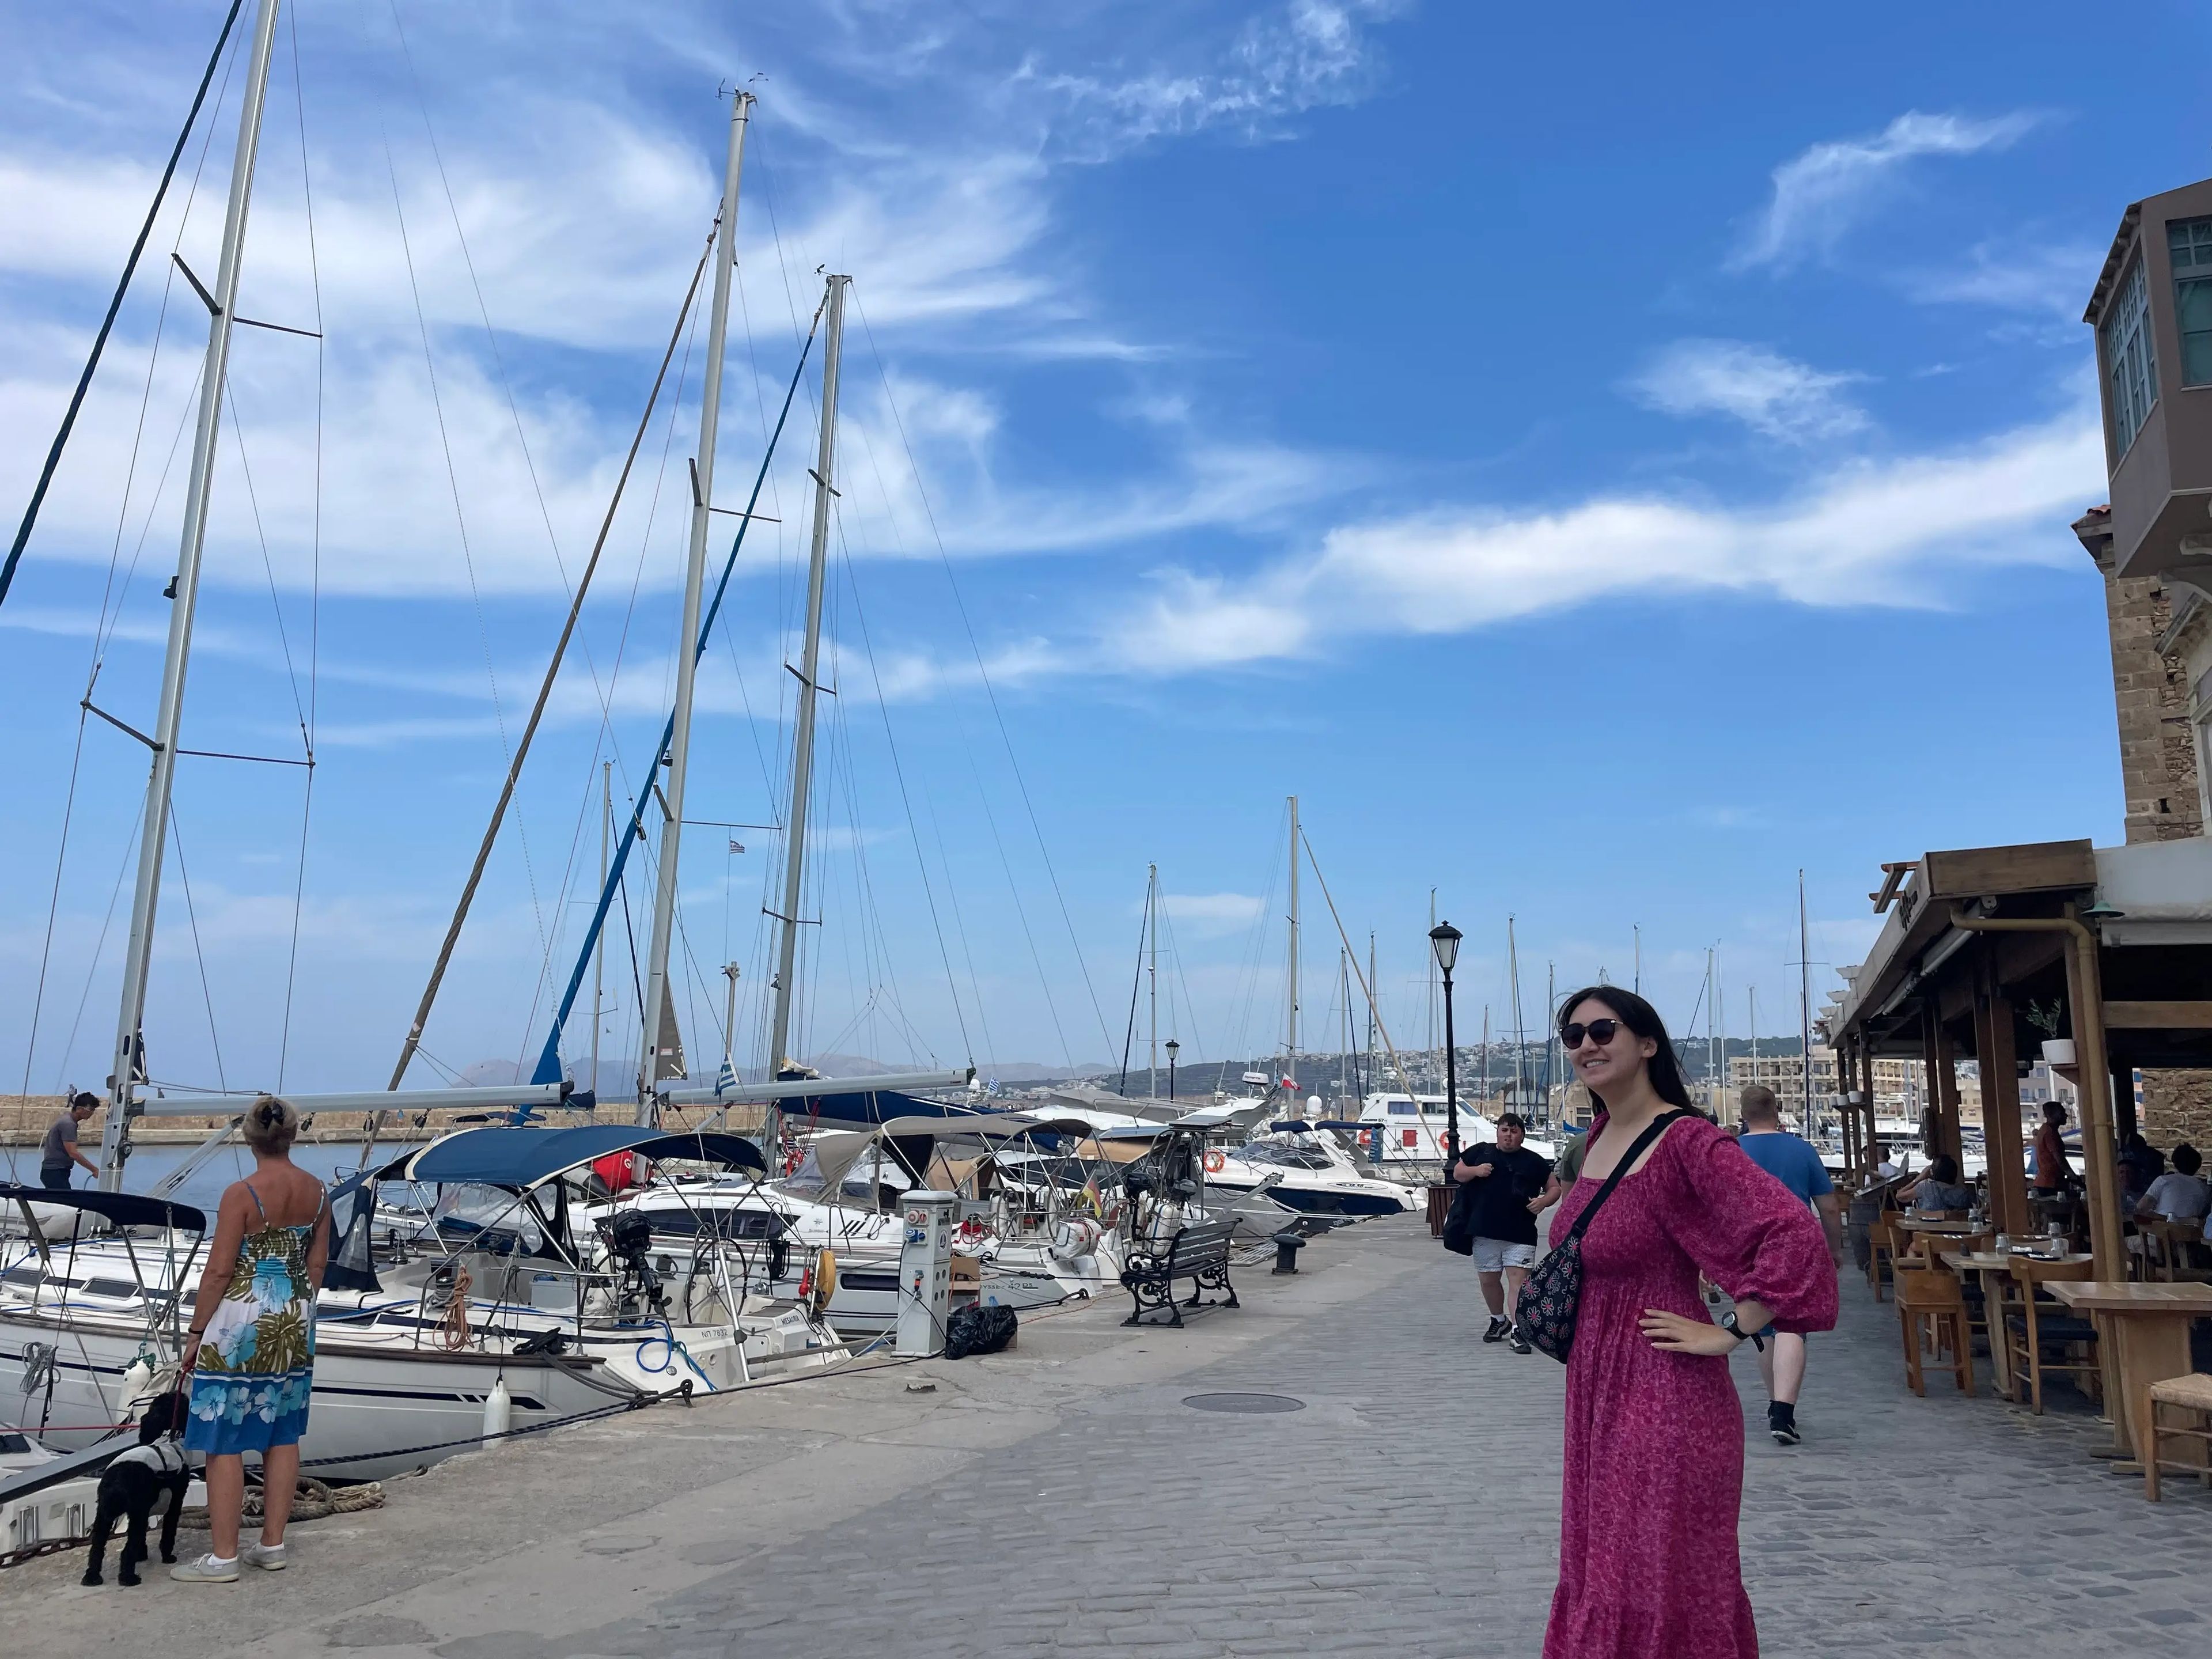 hannah posing for a photo in chania harbor in create greece